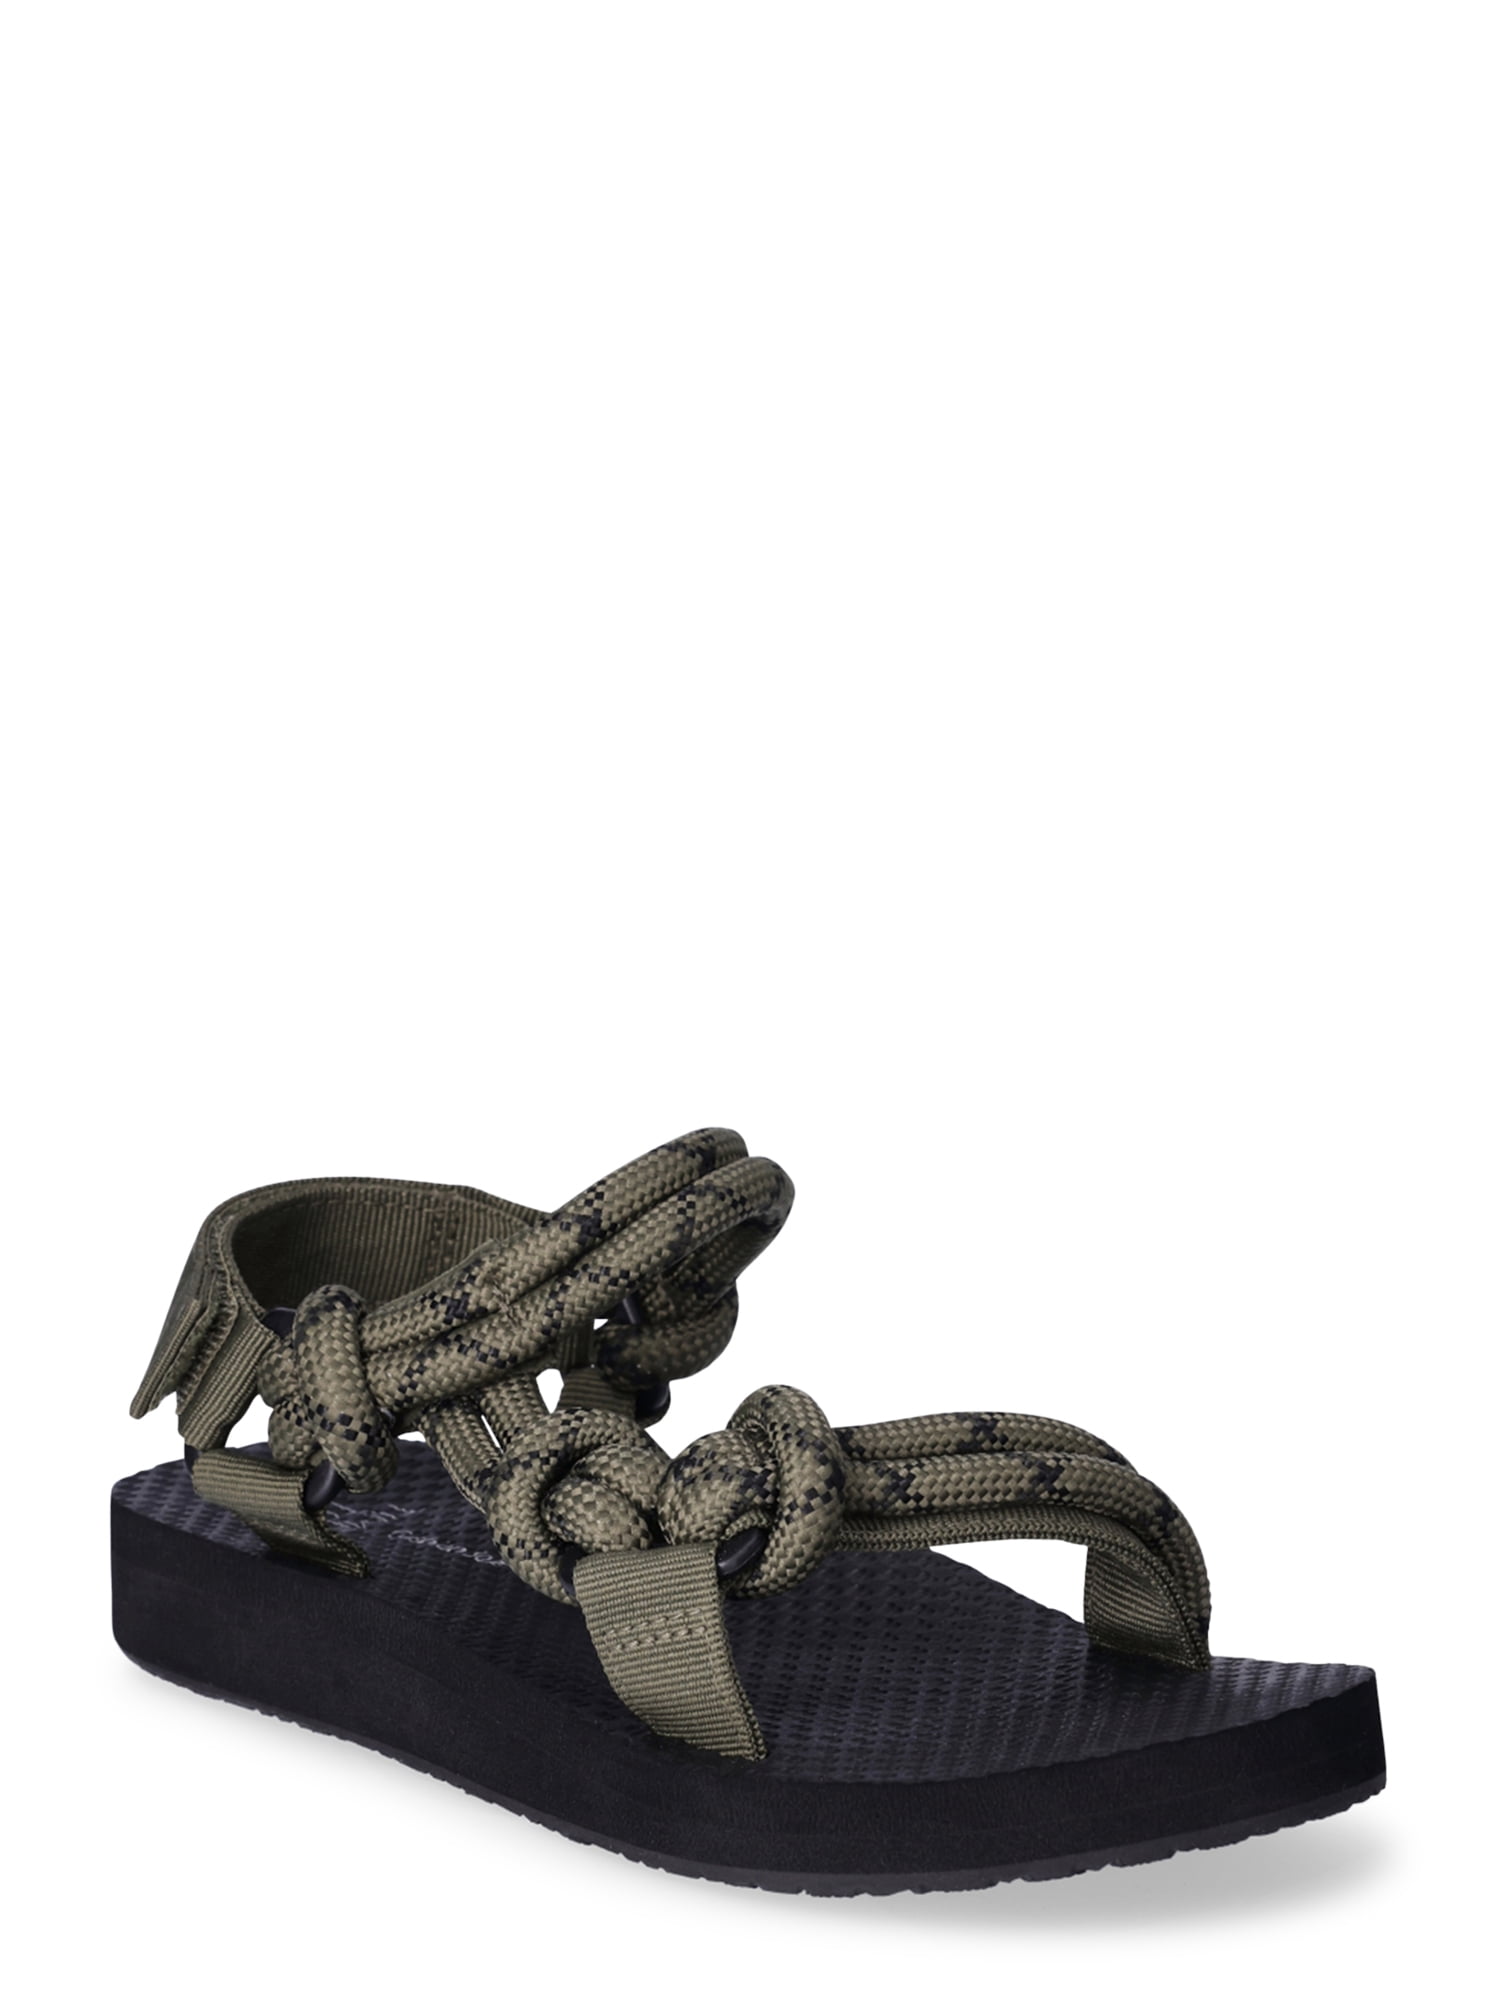 Women's Time and Tru Nature Sandal -Wide Width Available - Walmart.com